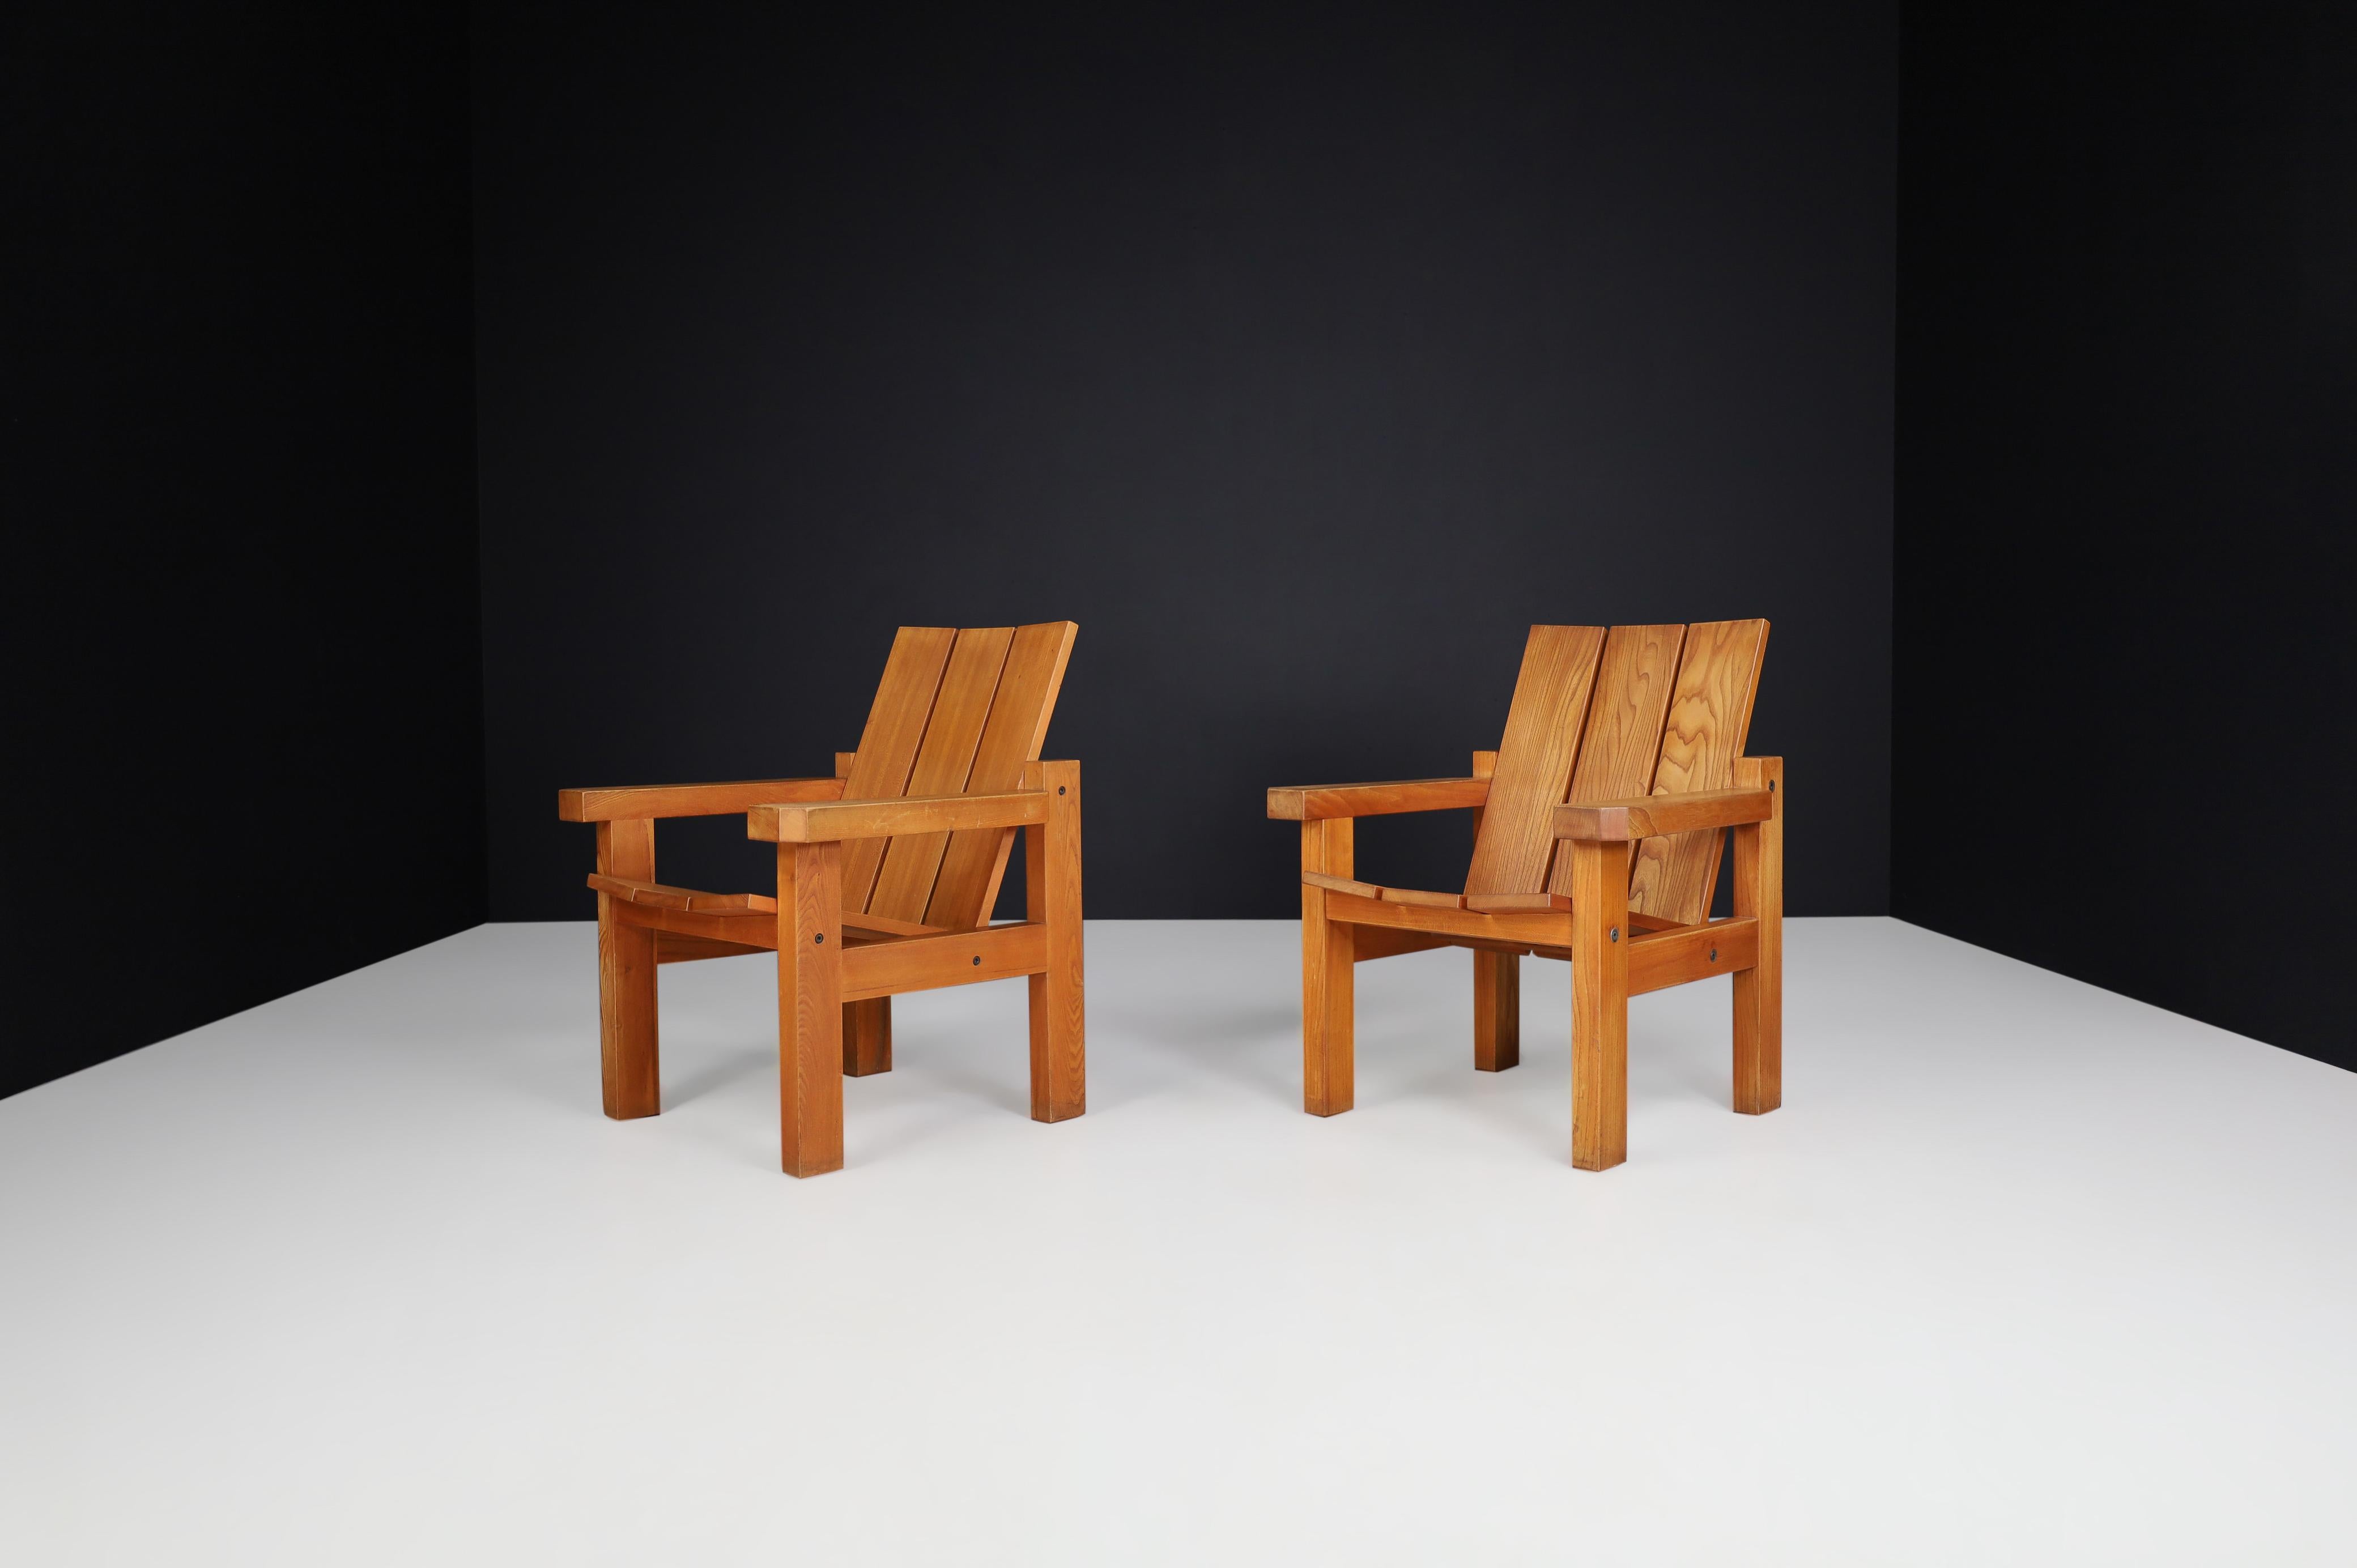 20th Century Mid-Century Modern, Minimalist Lounge Chairs in Solid Elm, France 1960s For Sale